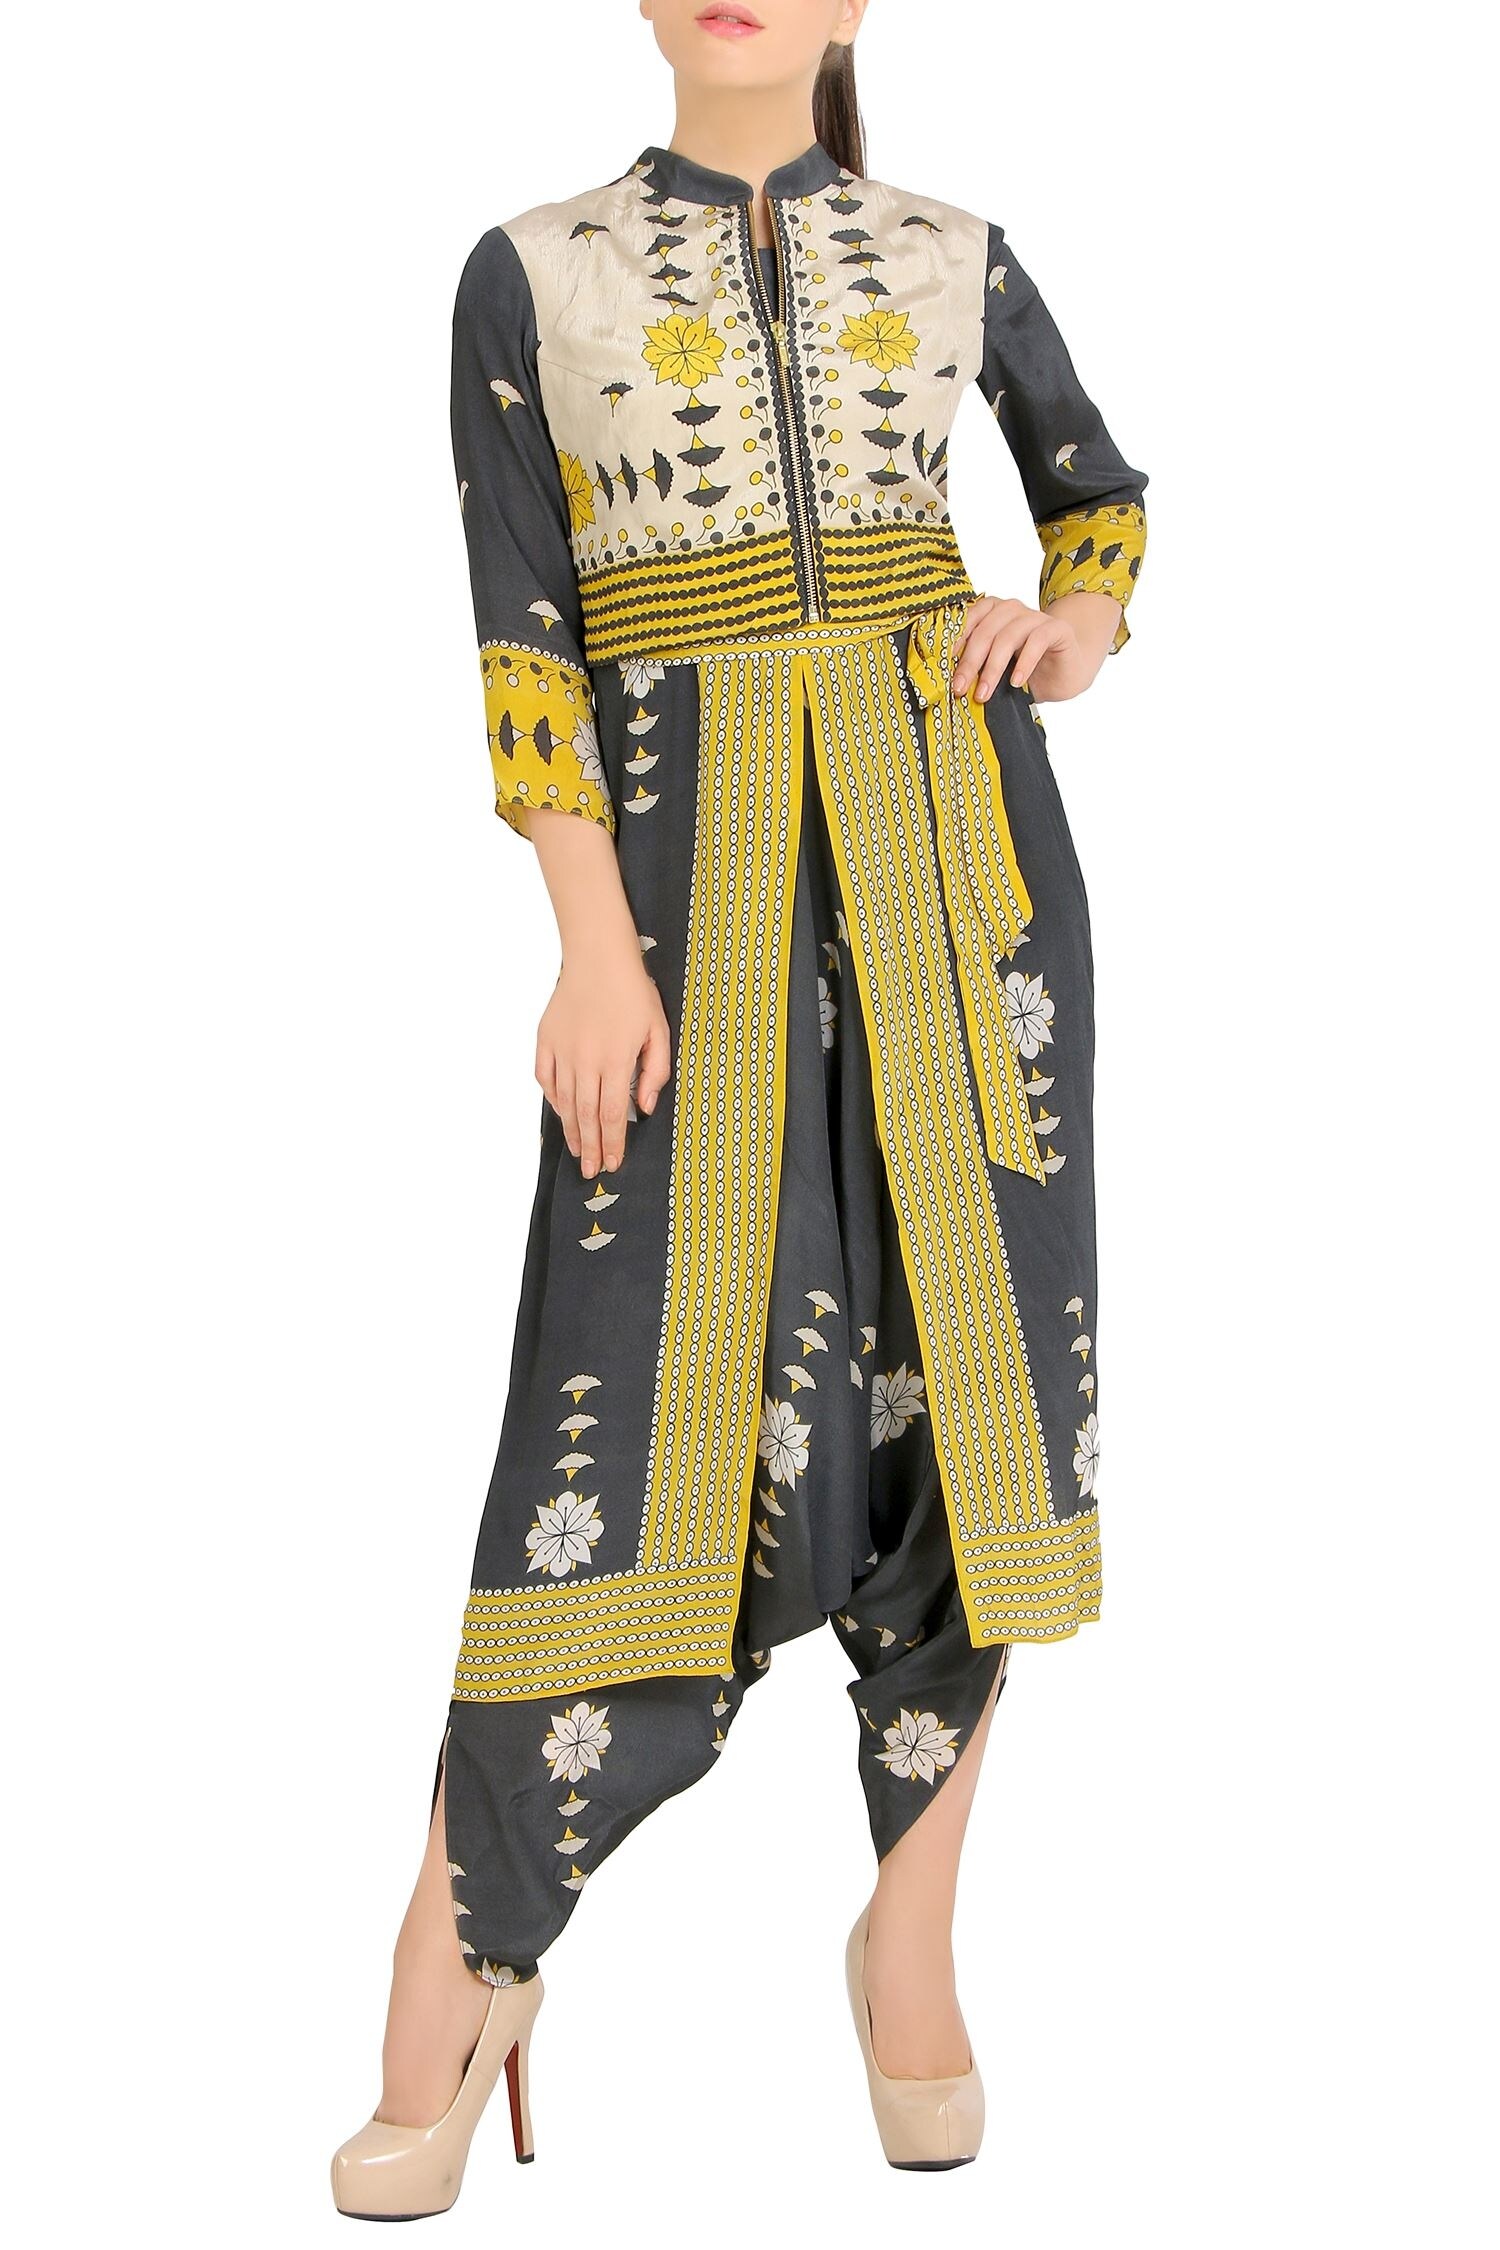 Soup by Sougat Paul Black Printed Jumpsuit With Jacket For Women